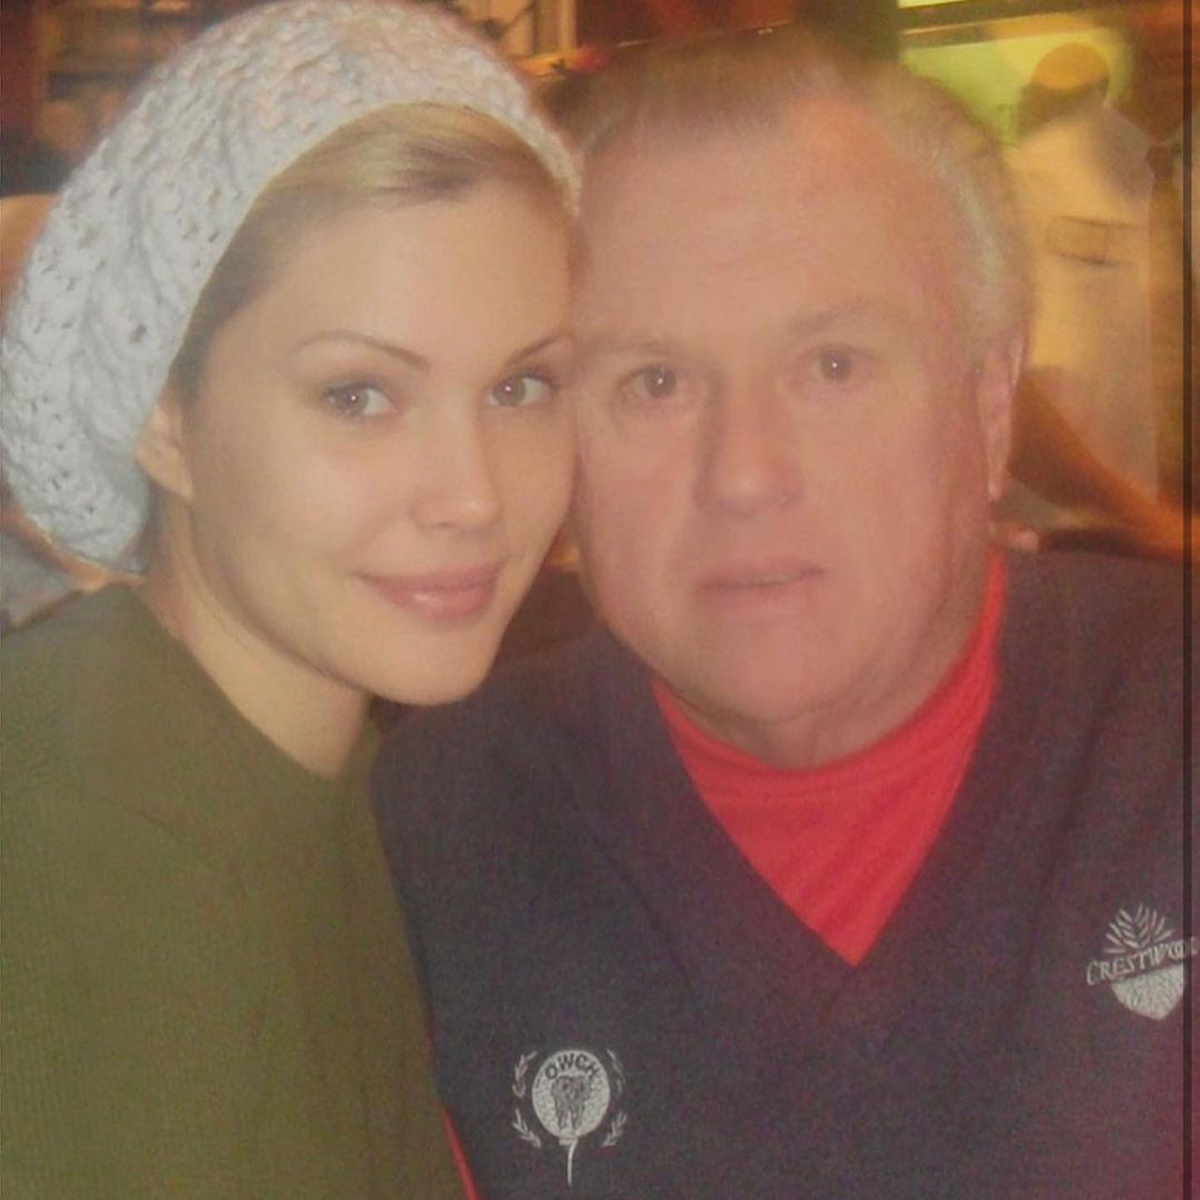 Shanna Moakler Shares Her Dad Has Died Months After Her Mom’s Death